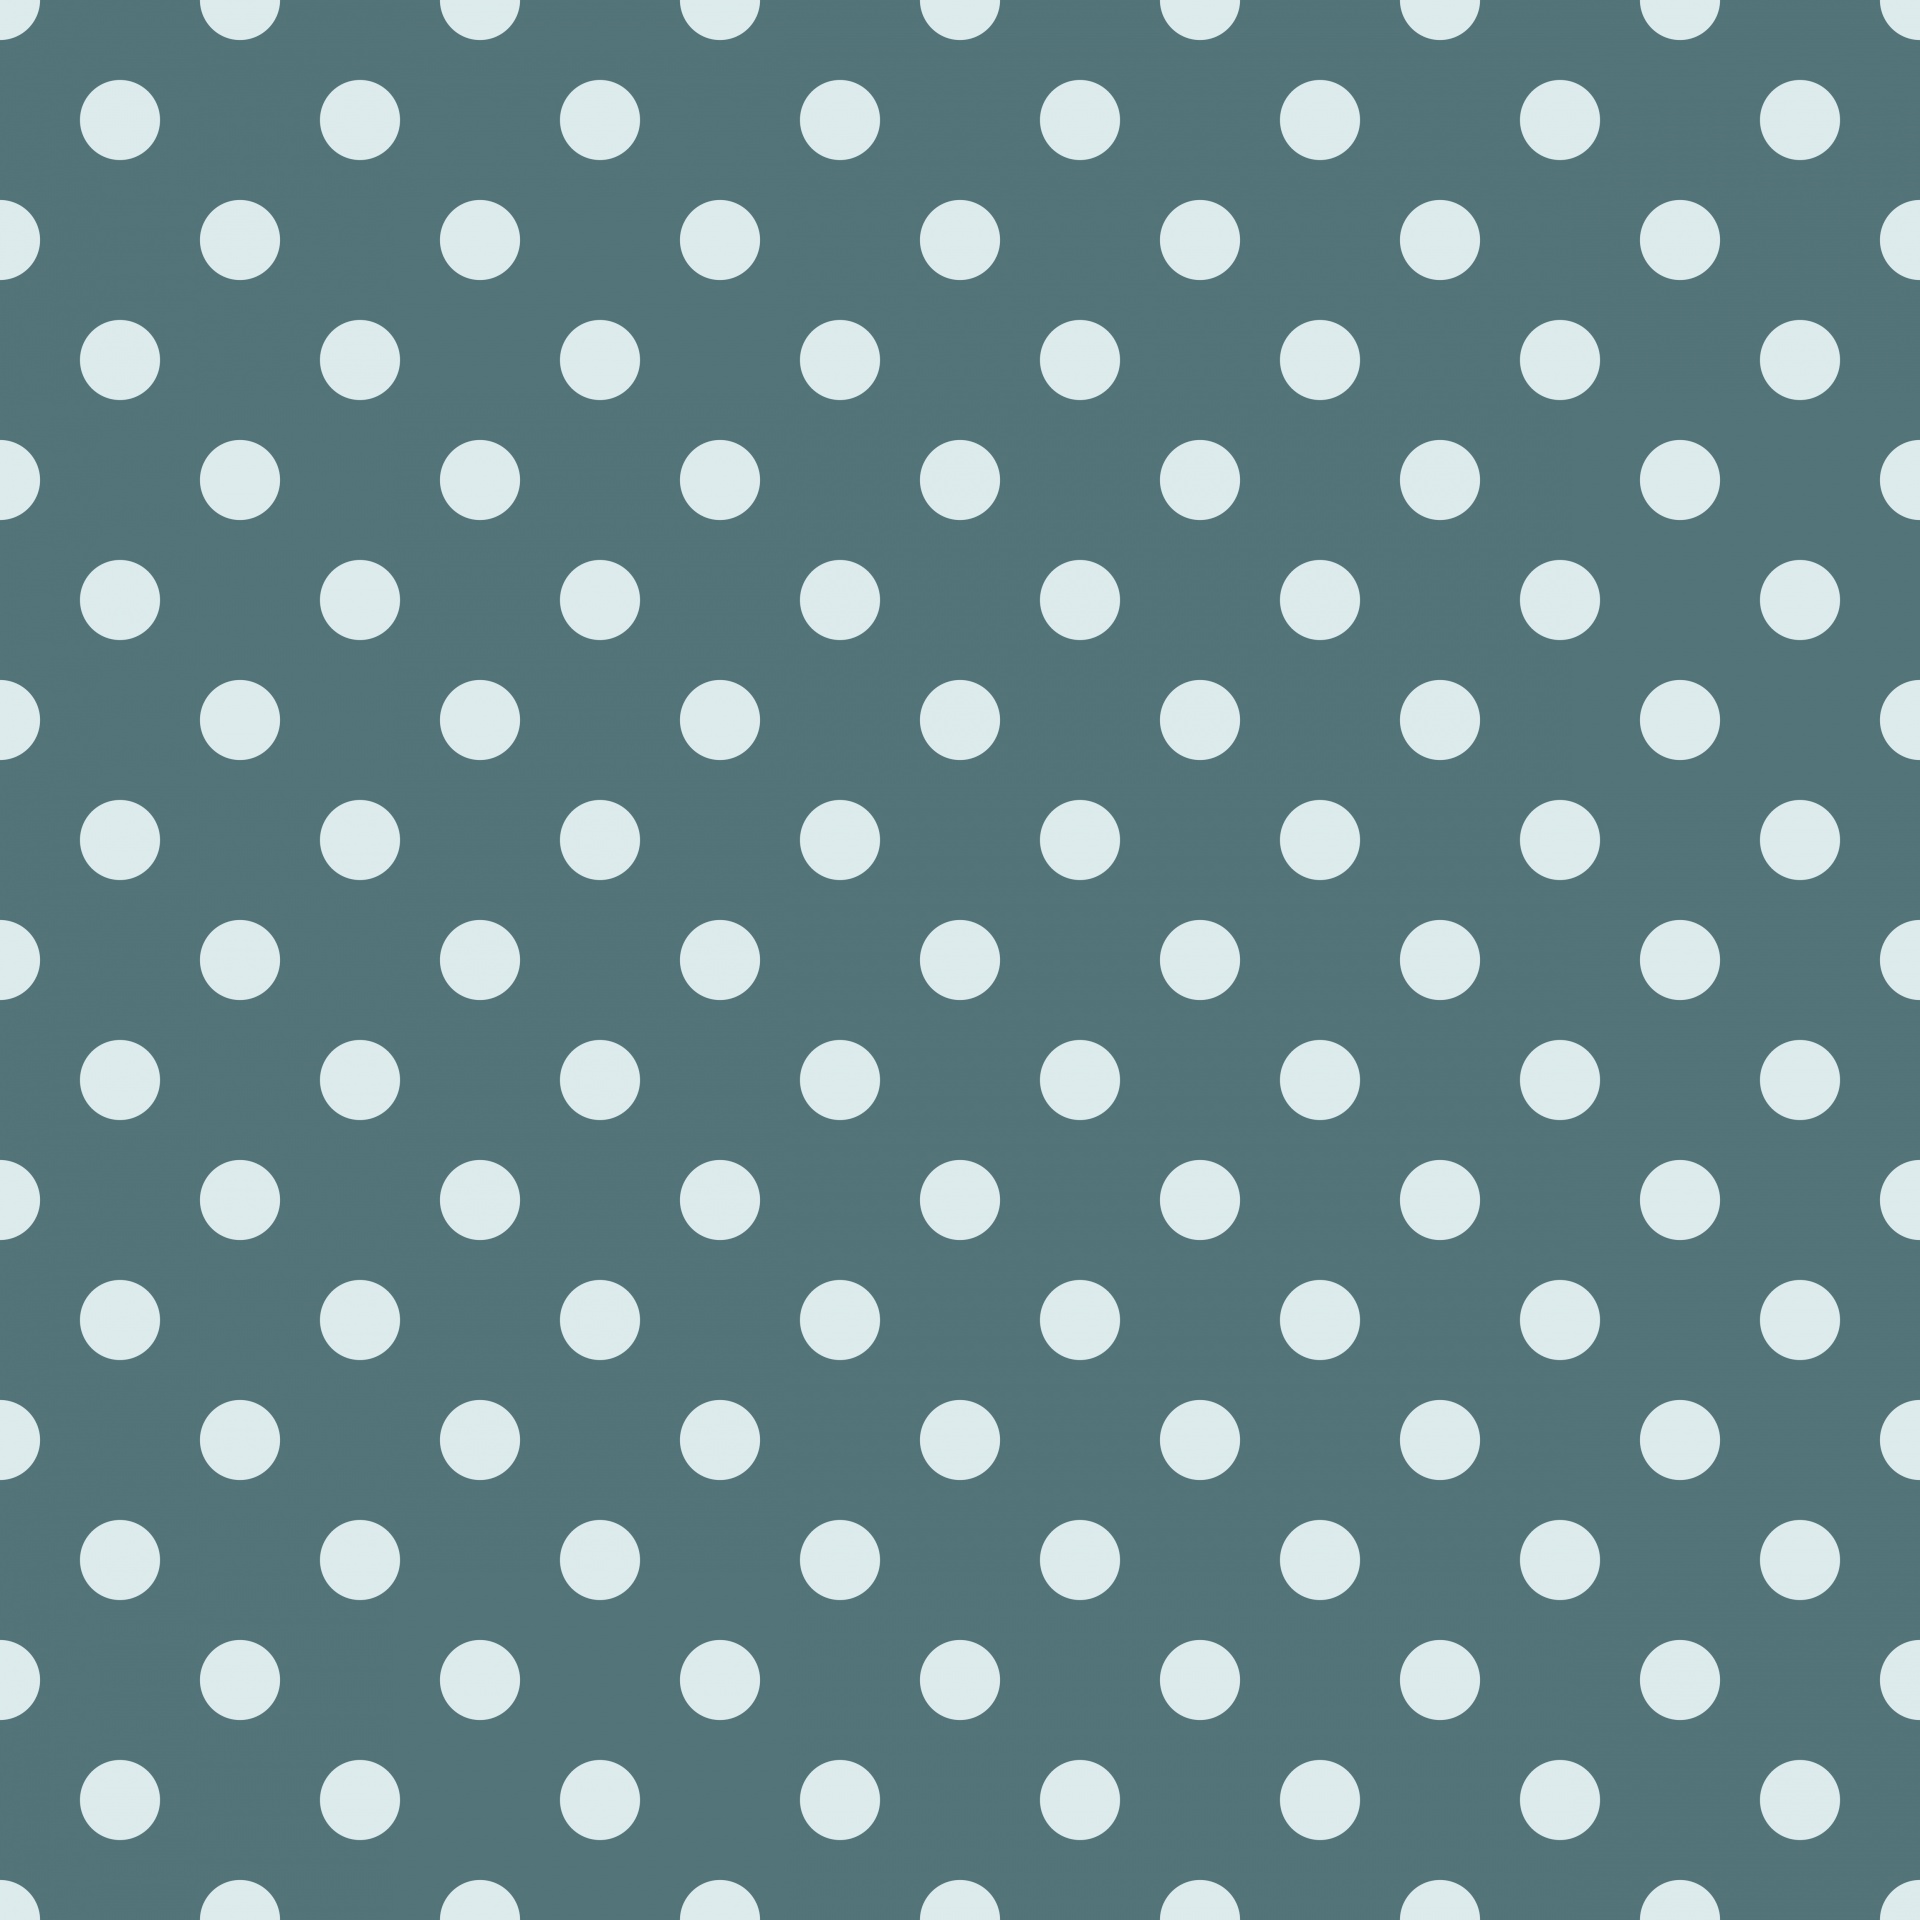 Medium sized teal green and gray polka dots wallpaper seamless pattern background